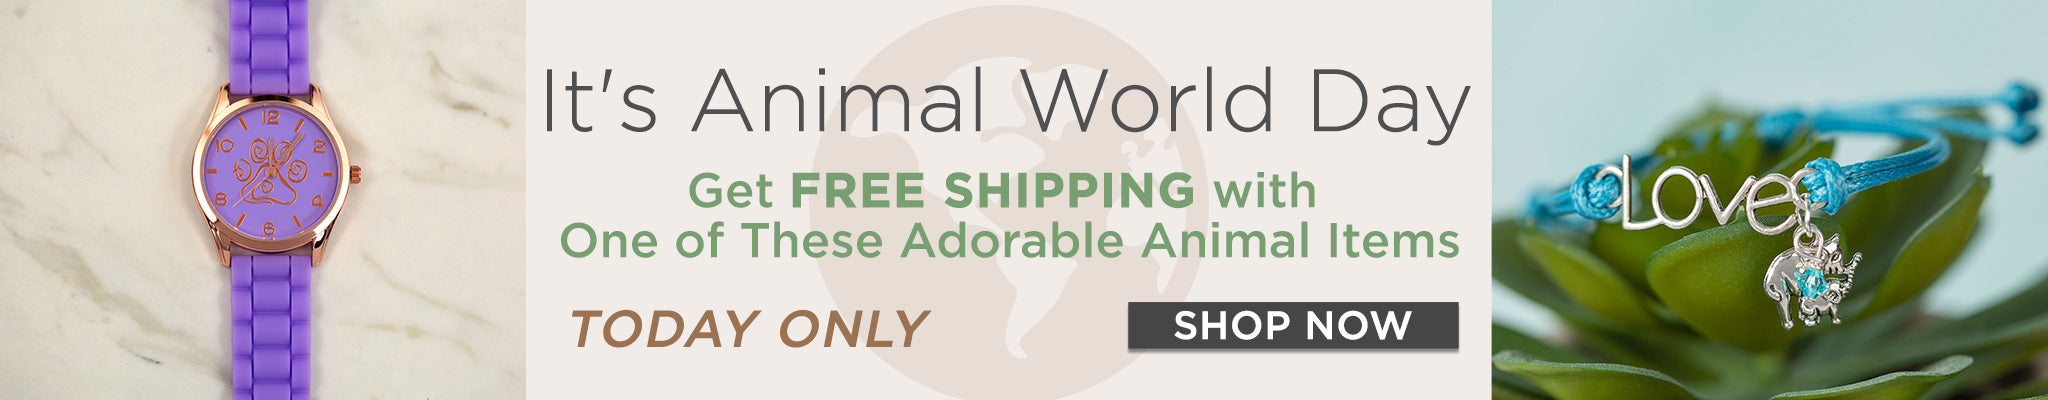 Today's World Animal Day | Get Free Shipping with one of these adorable animal items